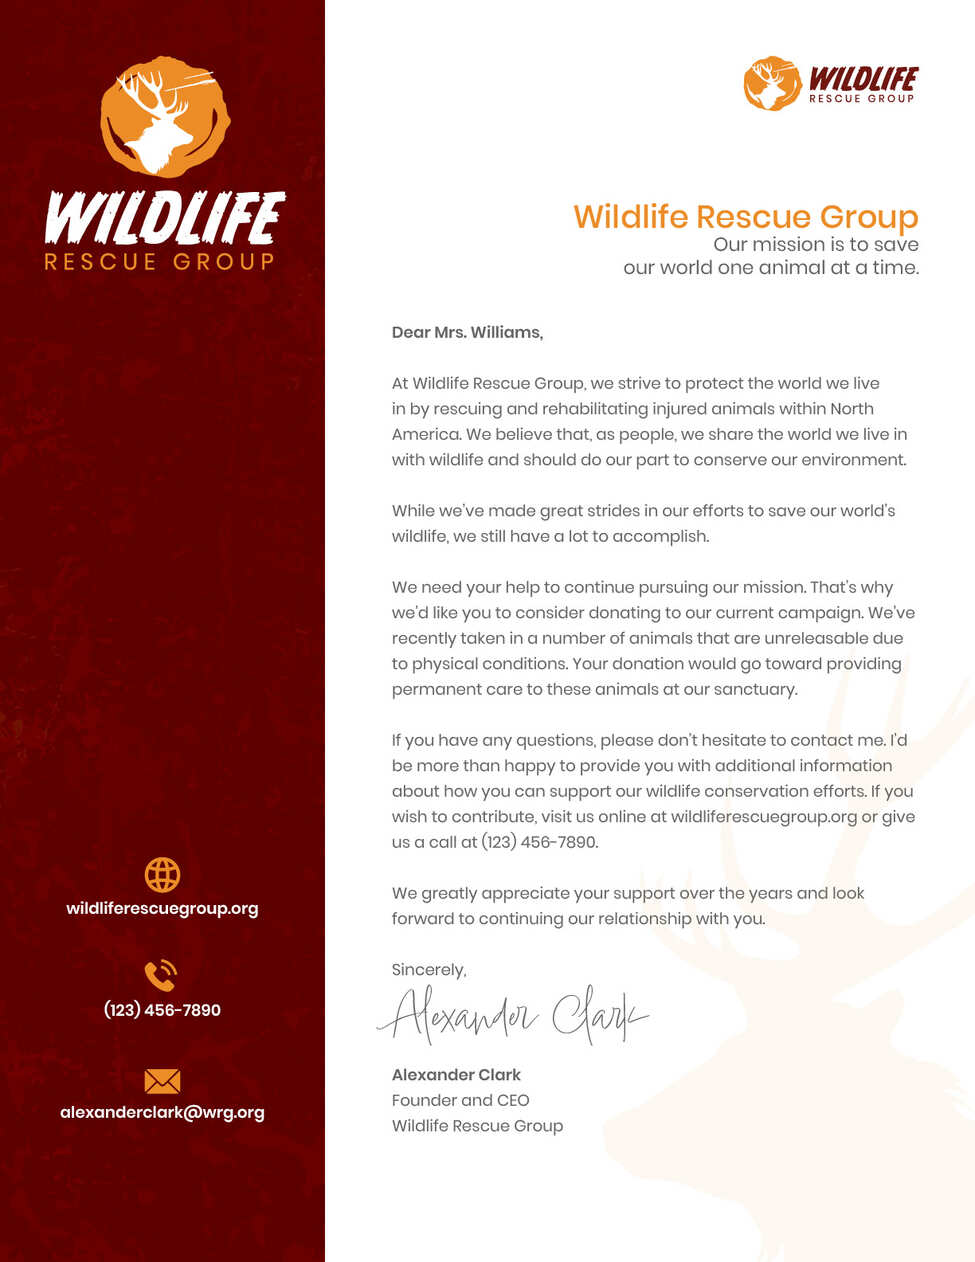 Kwala designed this donation request letter for the Wildlife Rescue Group.